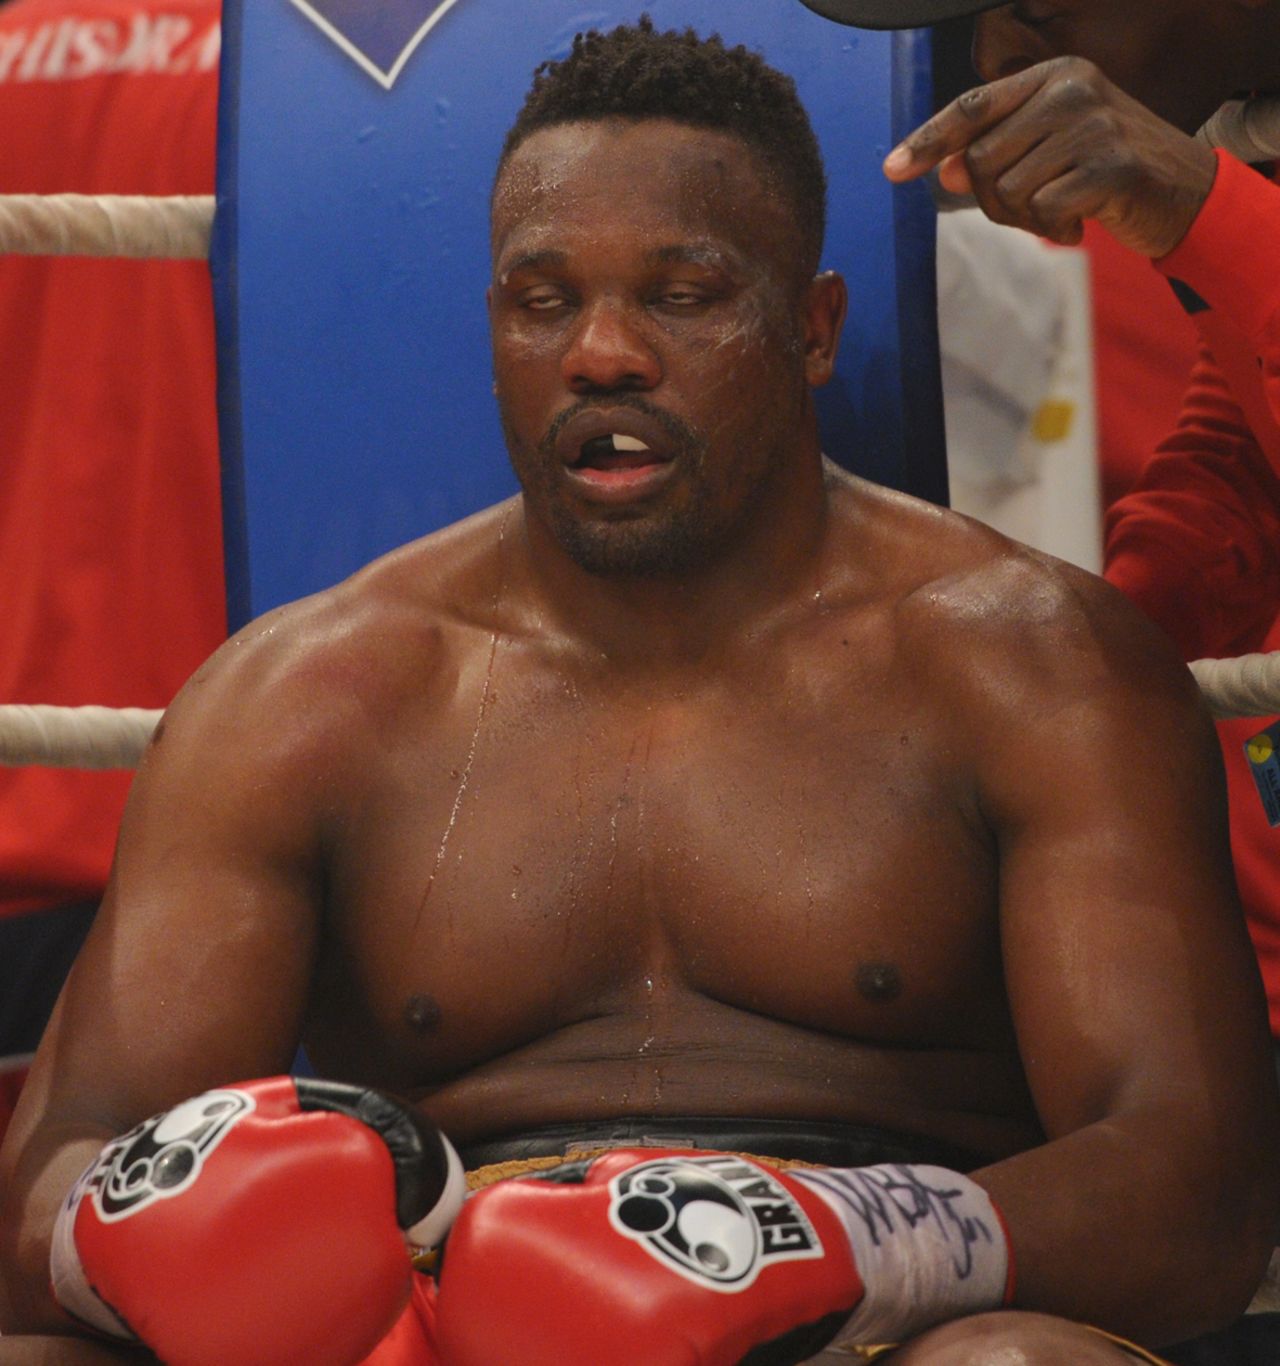 Chisora sits in his corner during his fight against WBC heavyweight champion Vitali Klitschko in the Olympic hall in Munich.